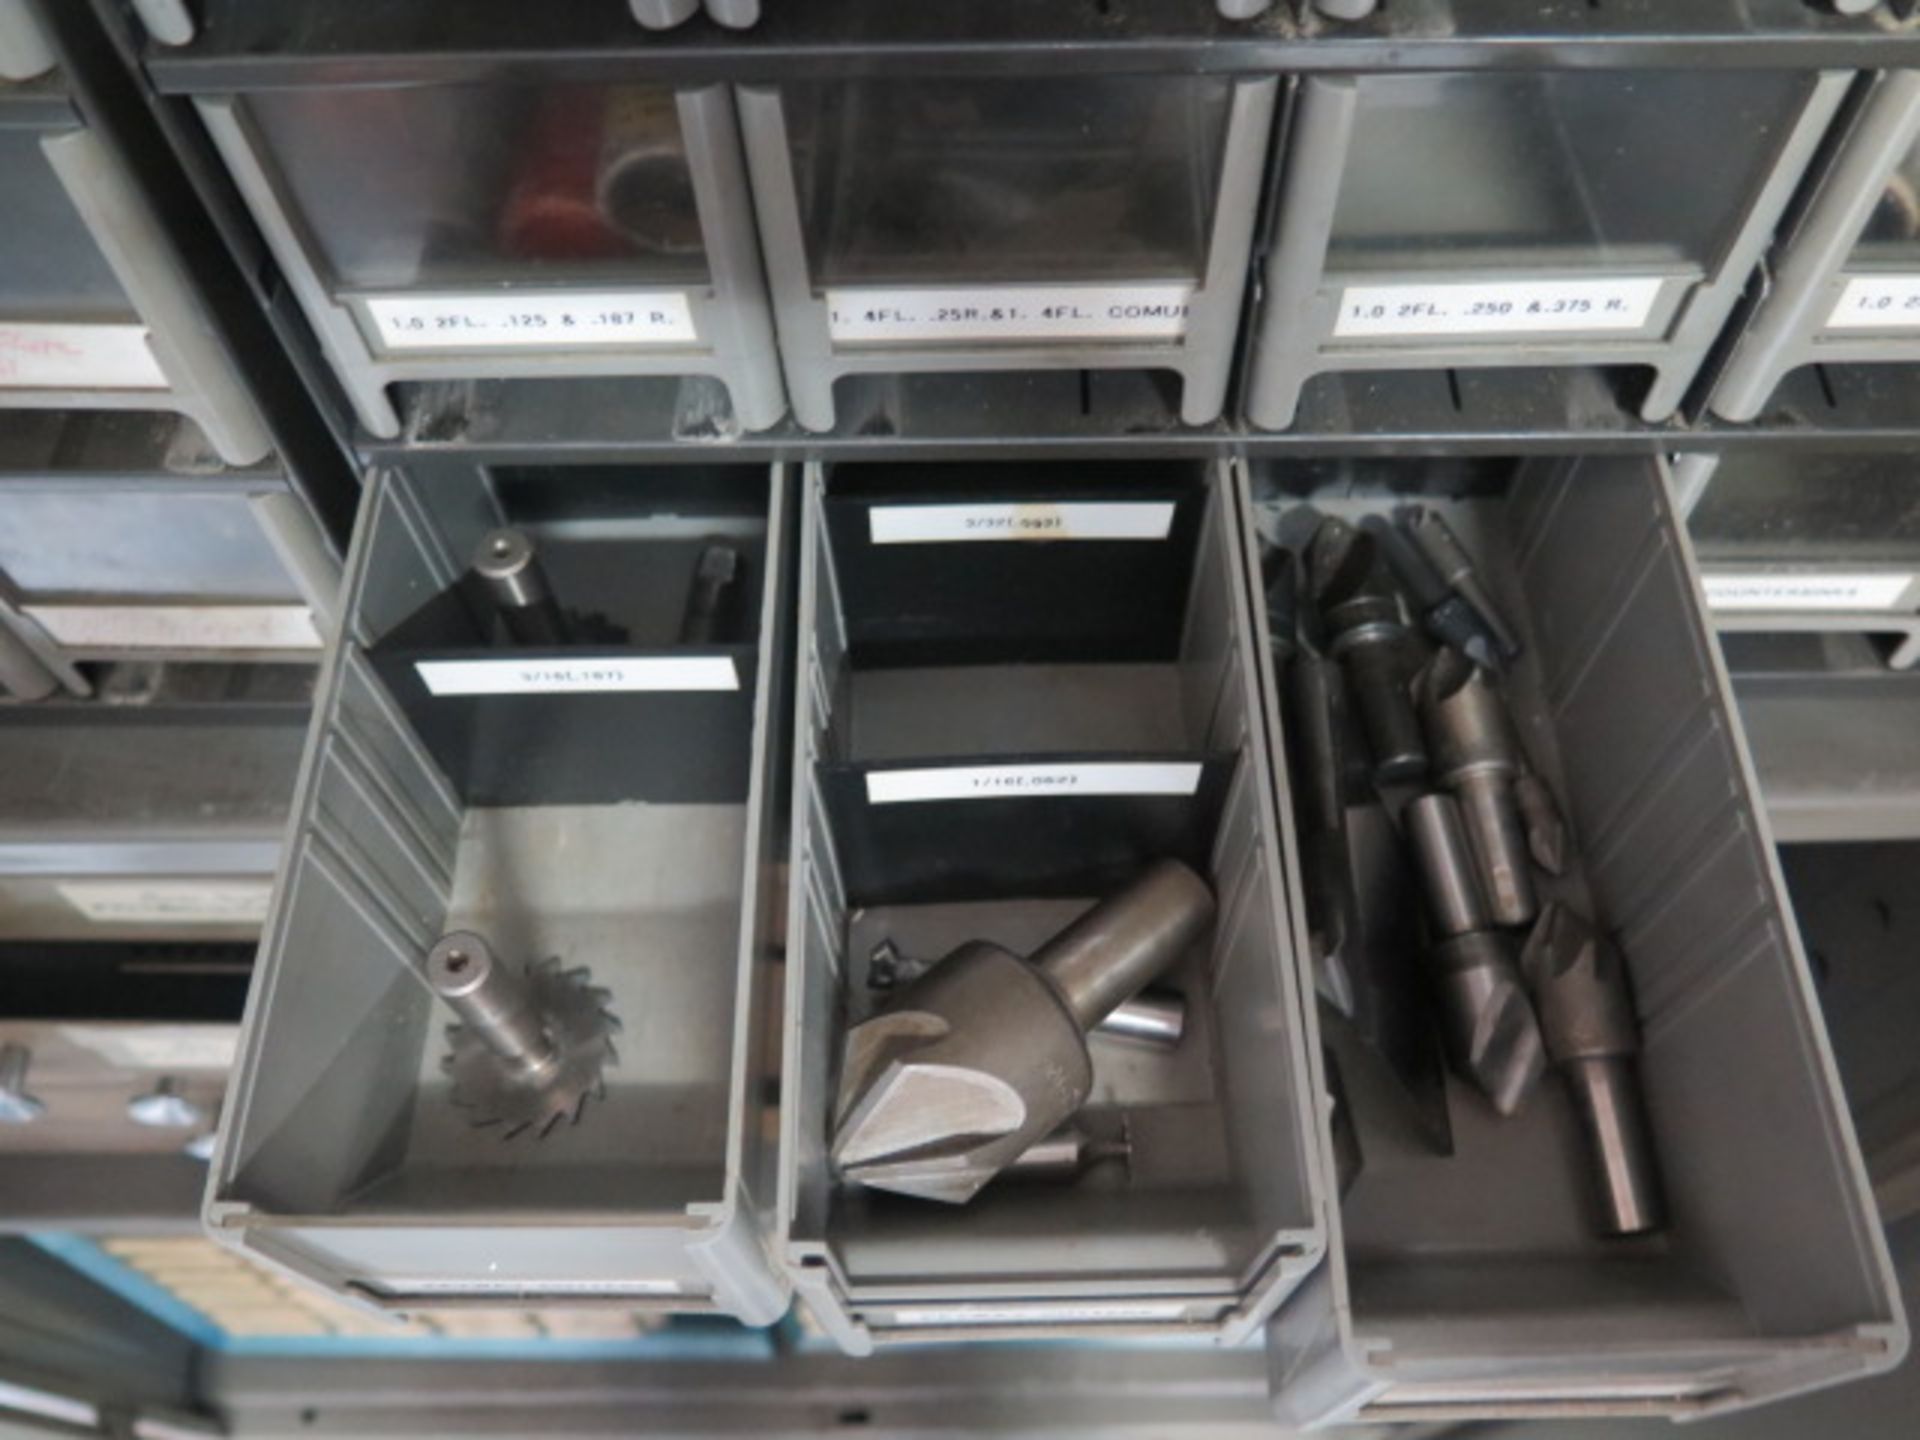 Storage and Parts Cabinets w/ Endmills, Radius Cutters, Key-Slot Cutters, Slitting Saws, Center - Image 6 of 9